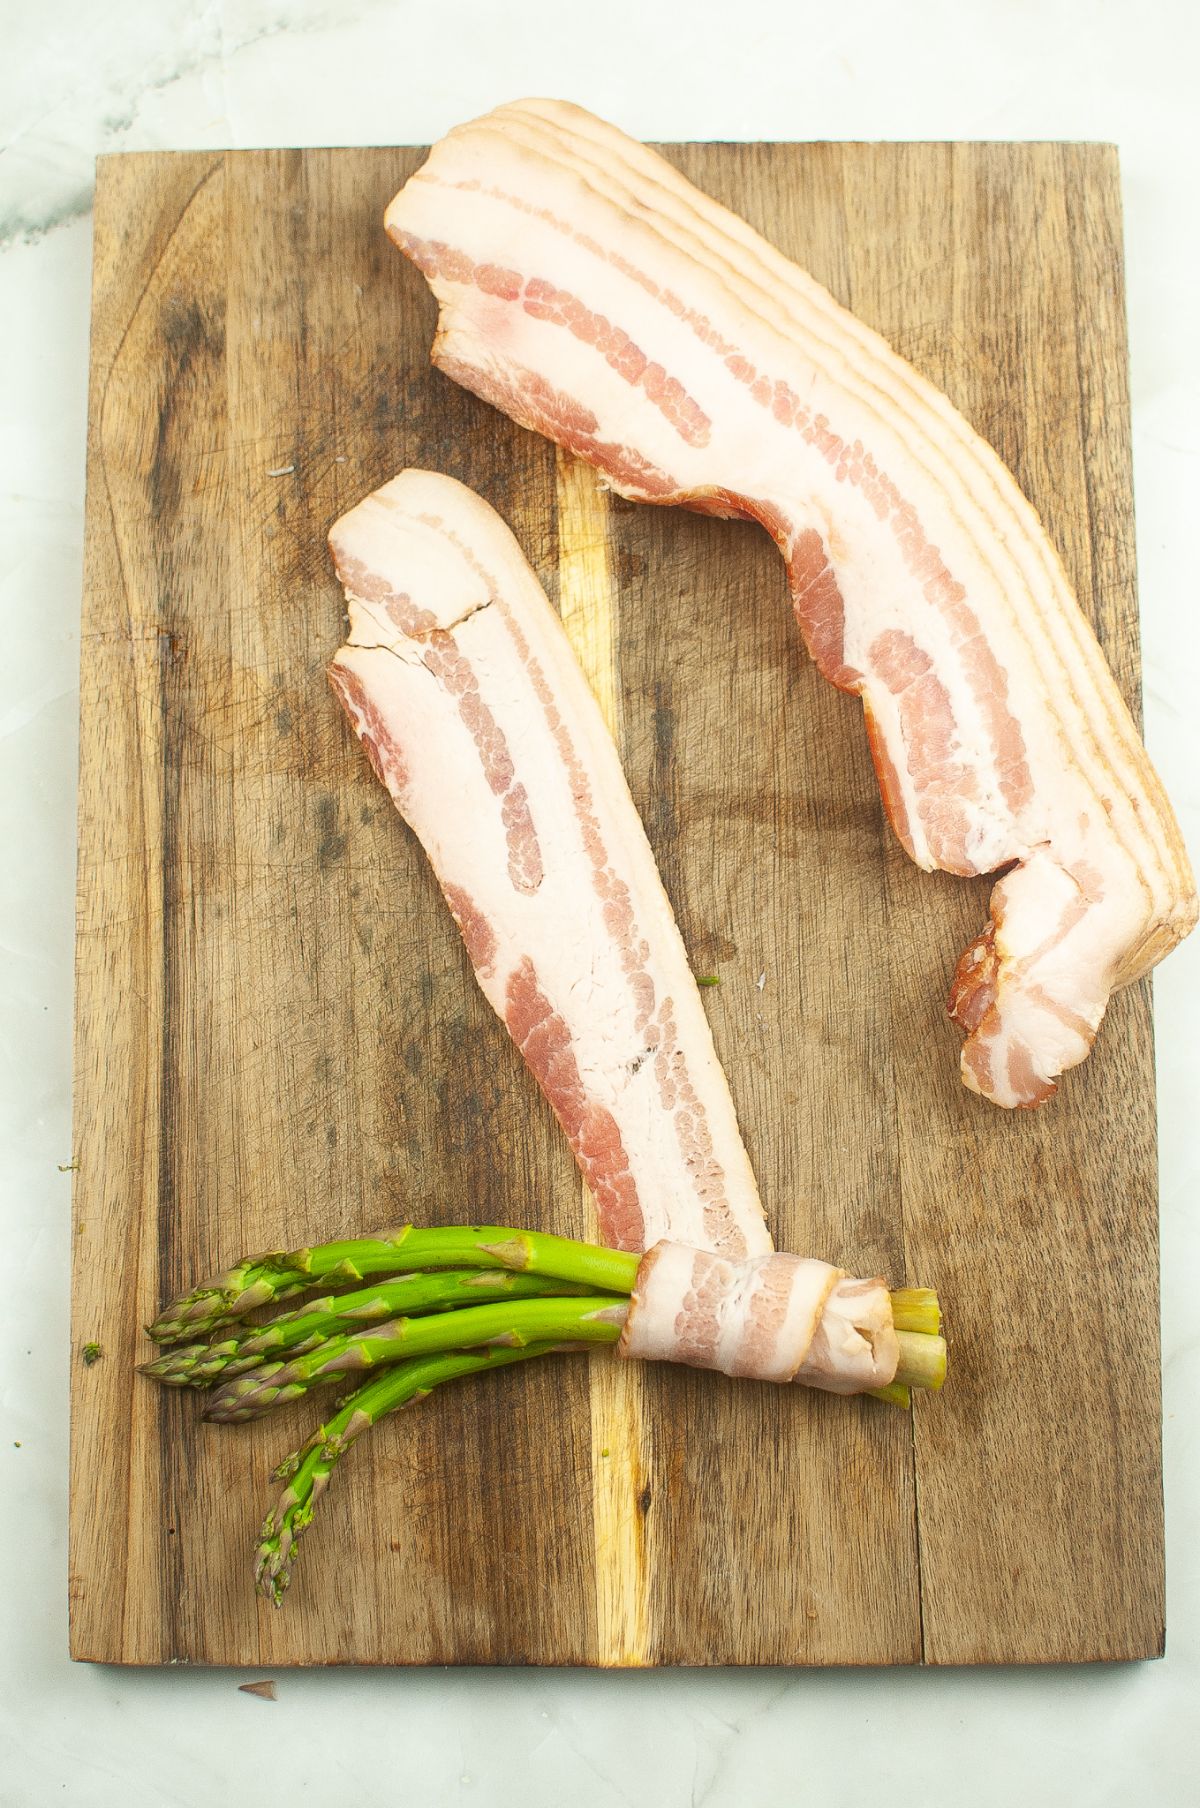 Sliced bacon being used to wrap up a bunch of asparagus on a wooden cutting board.